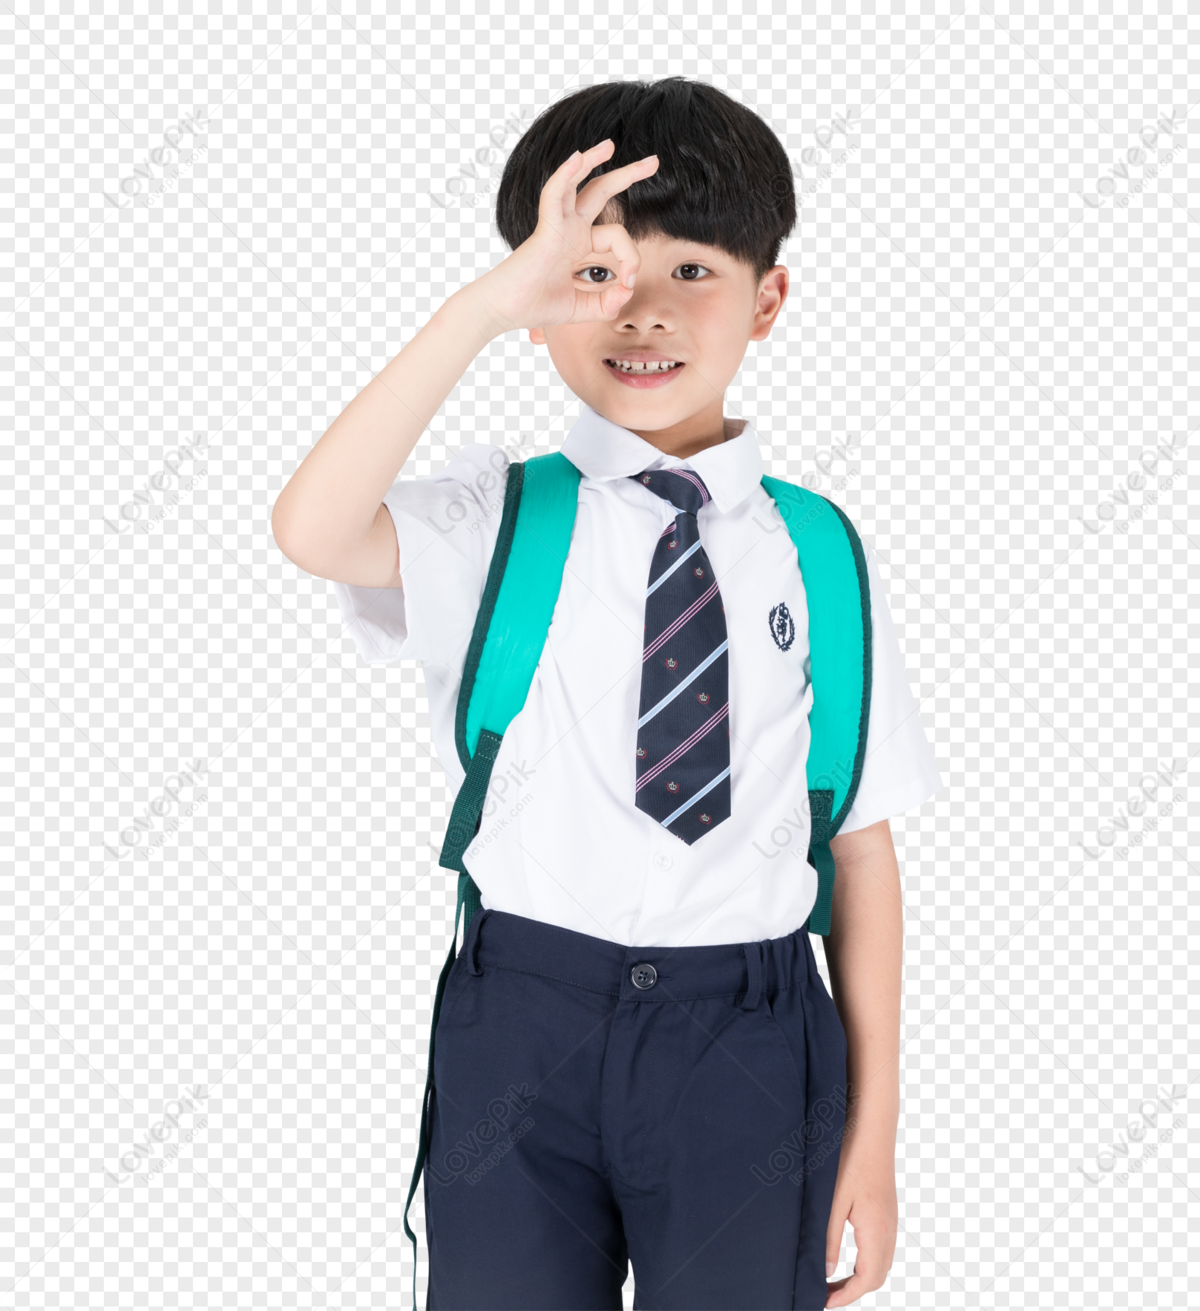 Primary School Kid-Boy School Student With Arms-Crossed Standing And Smiling